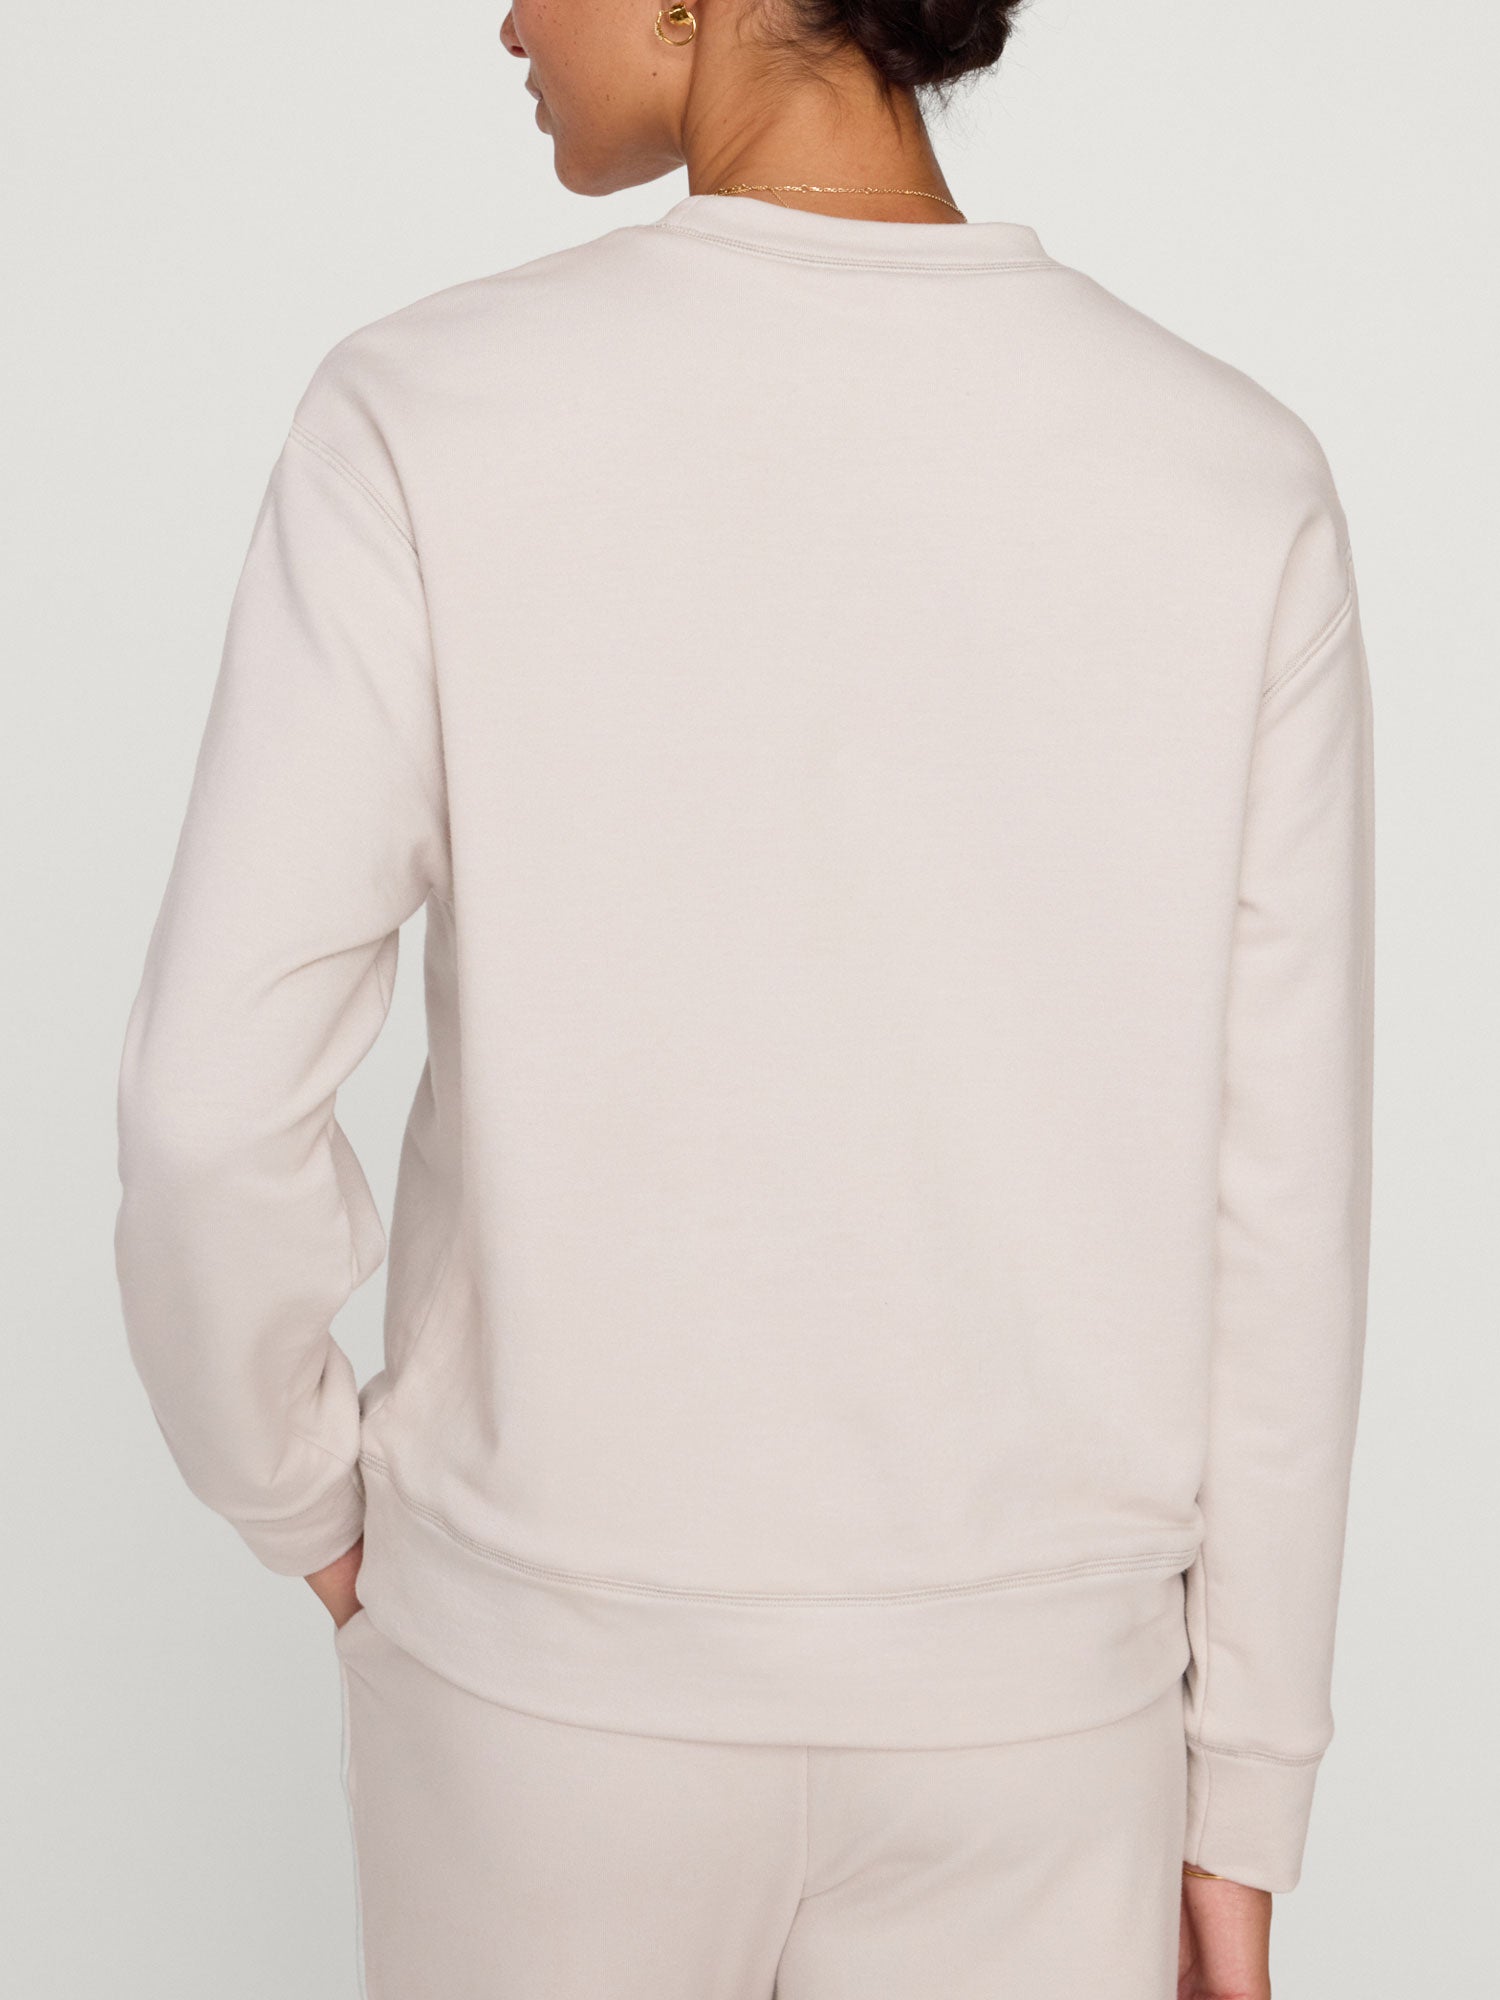 Mallo French Terry off-white pullover sweatshirt back view